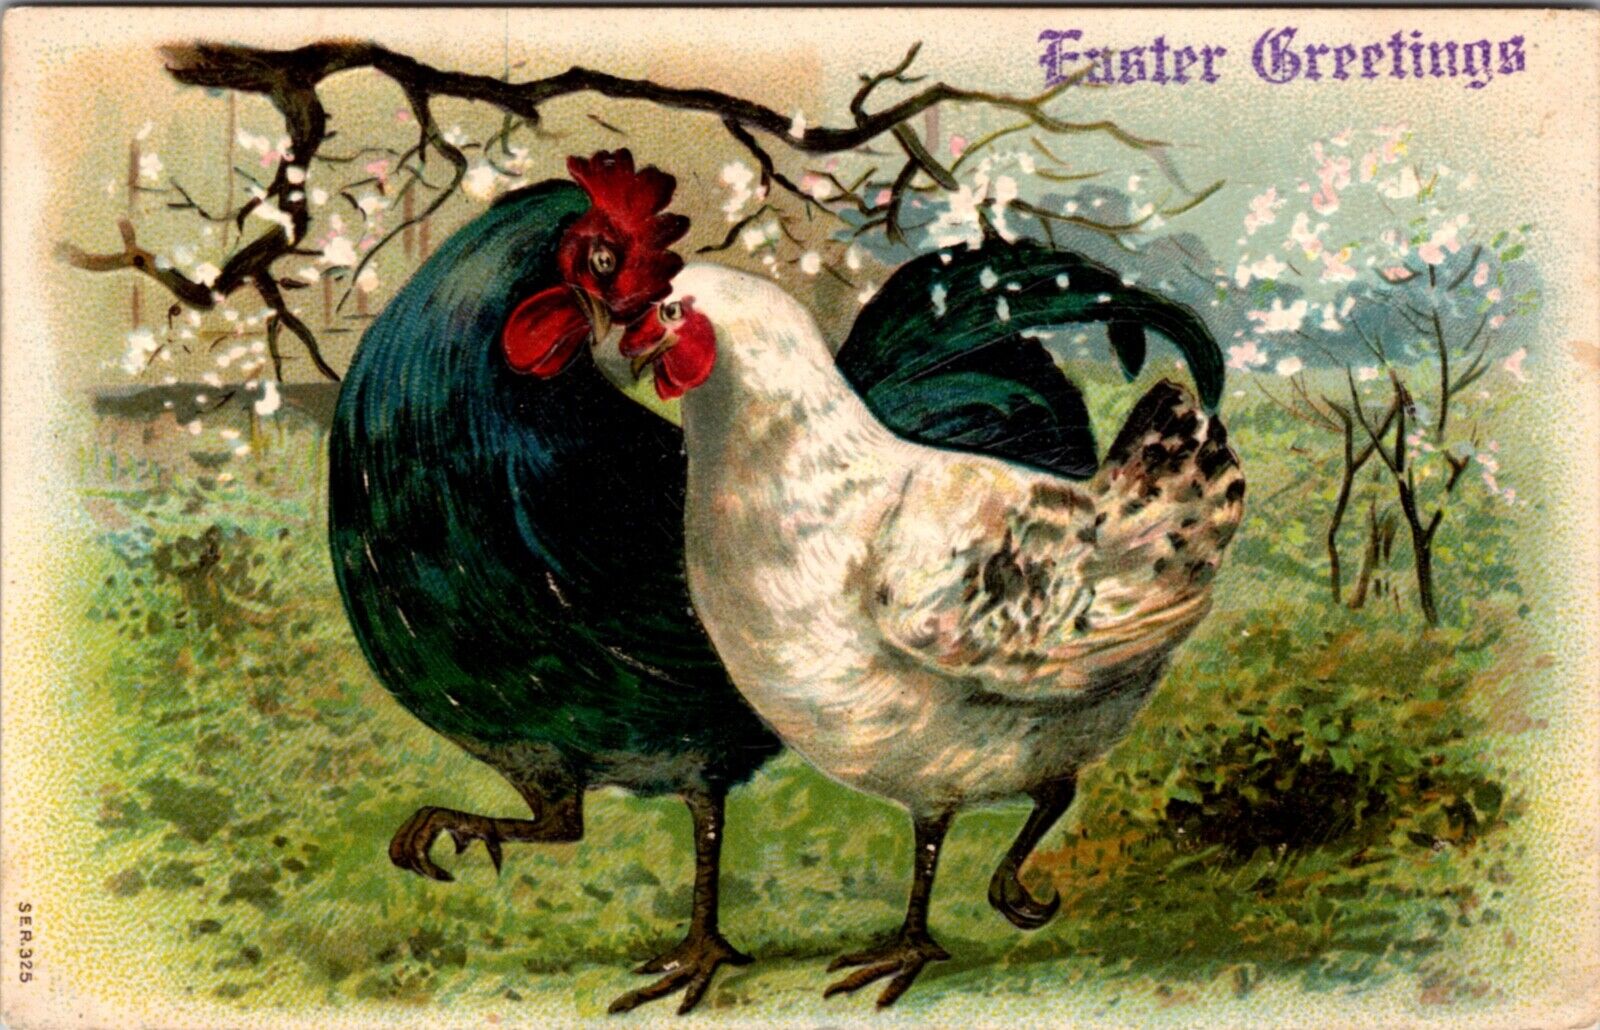 Easter Greetings Postcard Two Chickens Taking a Loving Walk Together